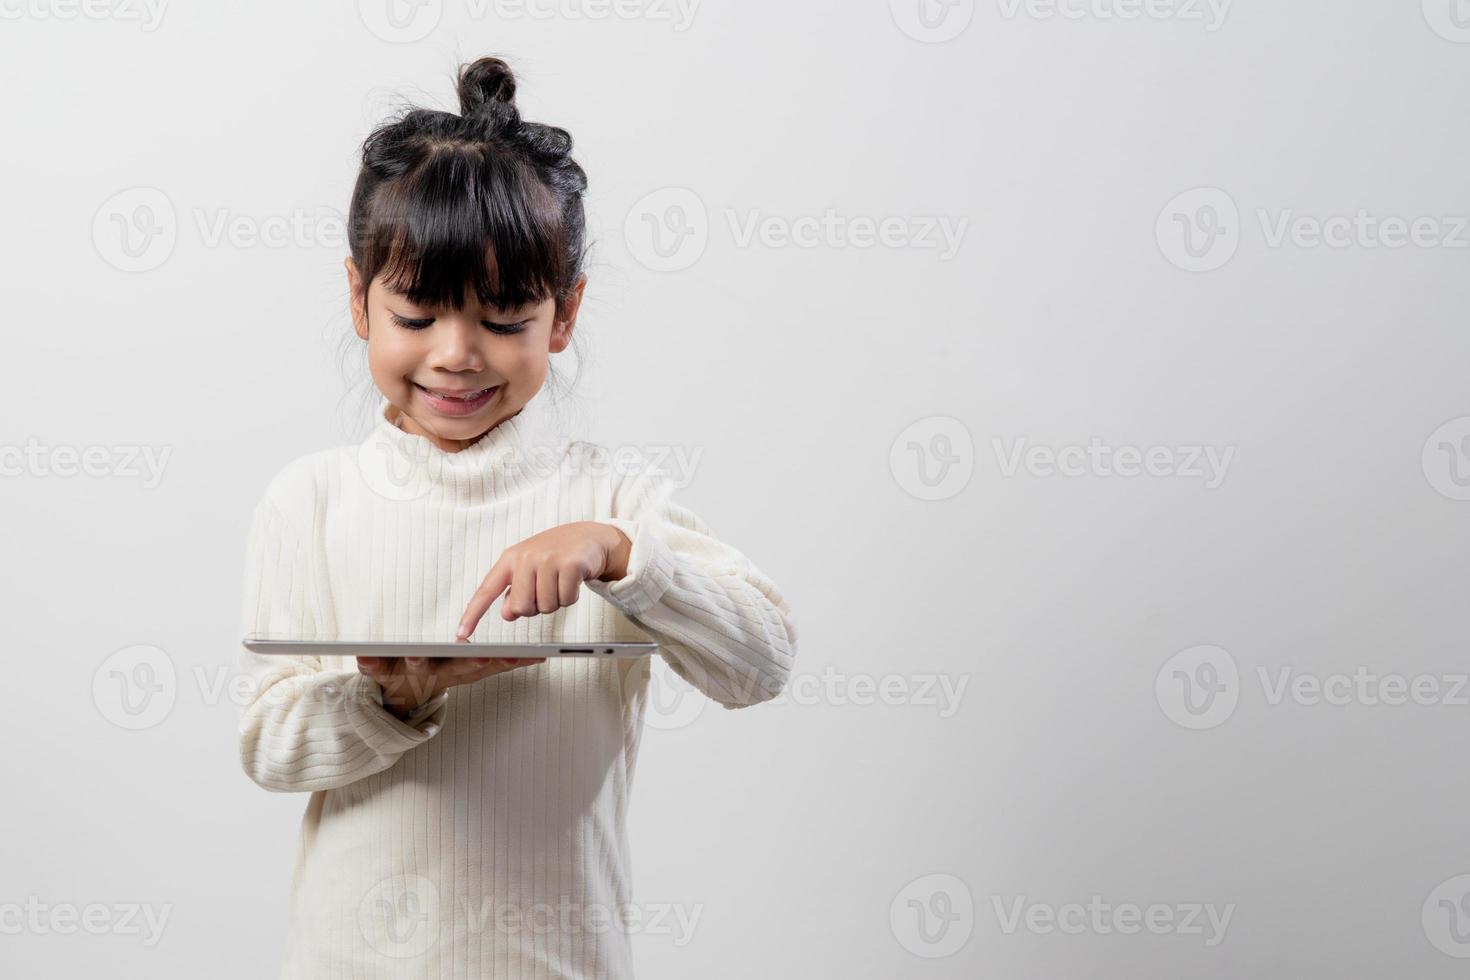 Asian little girl holding and using the digital tablet on white studio background, free copy space photo